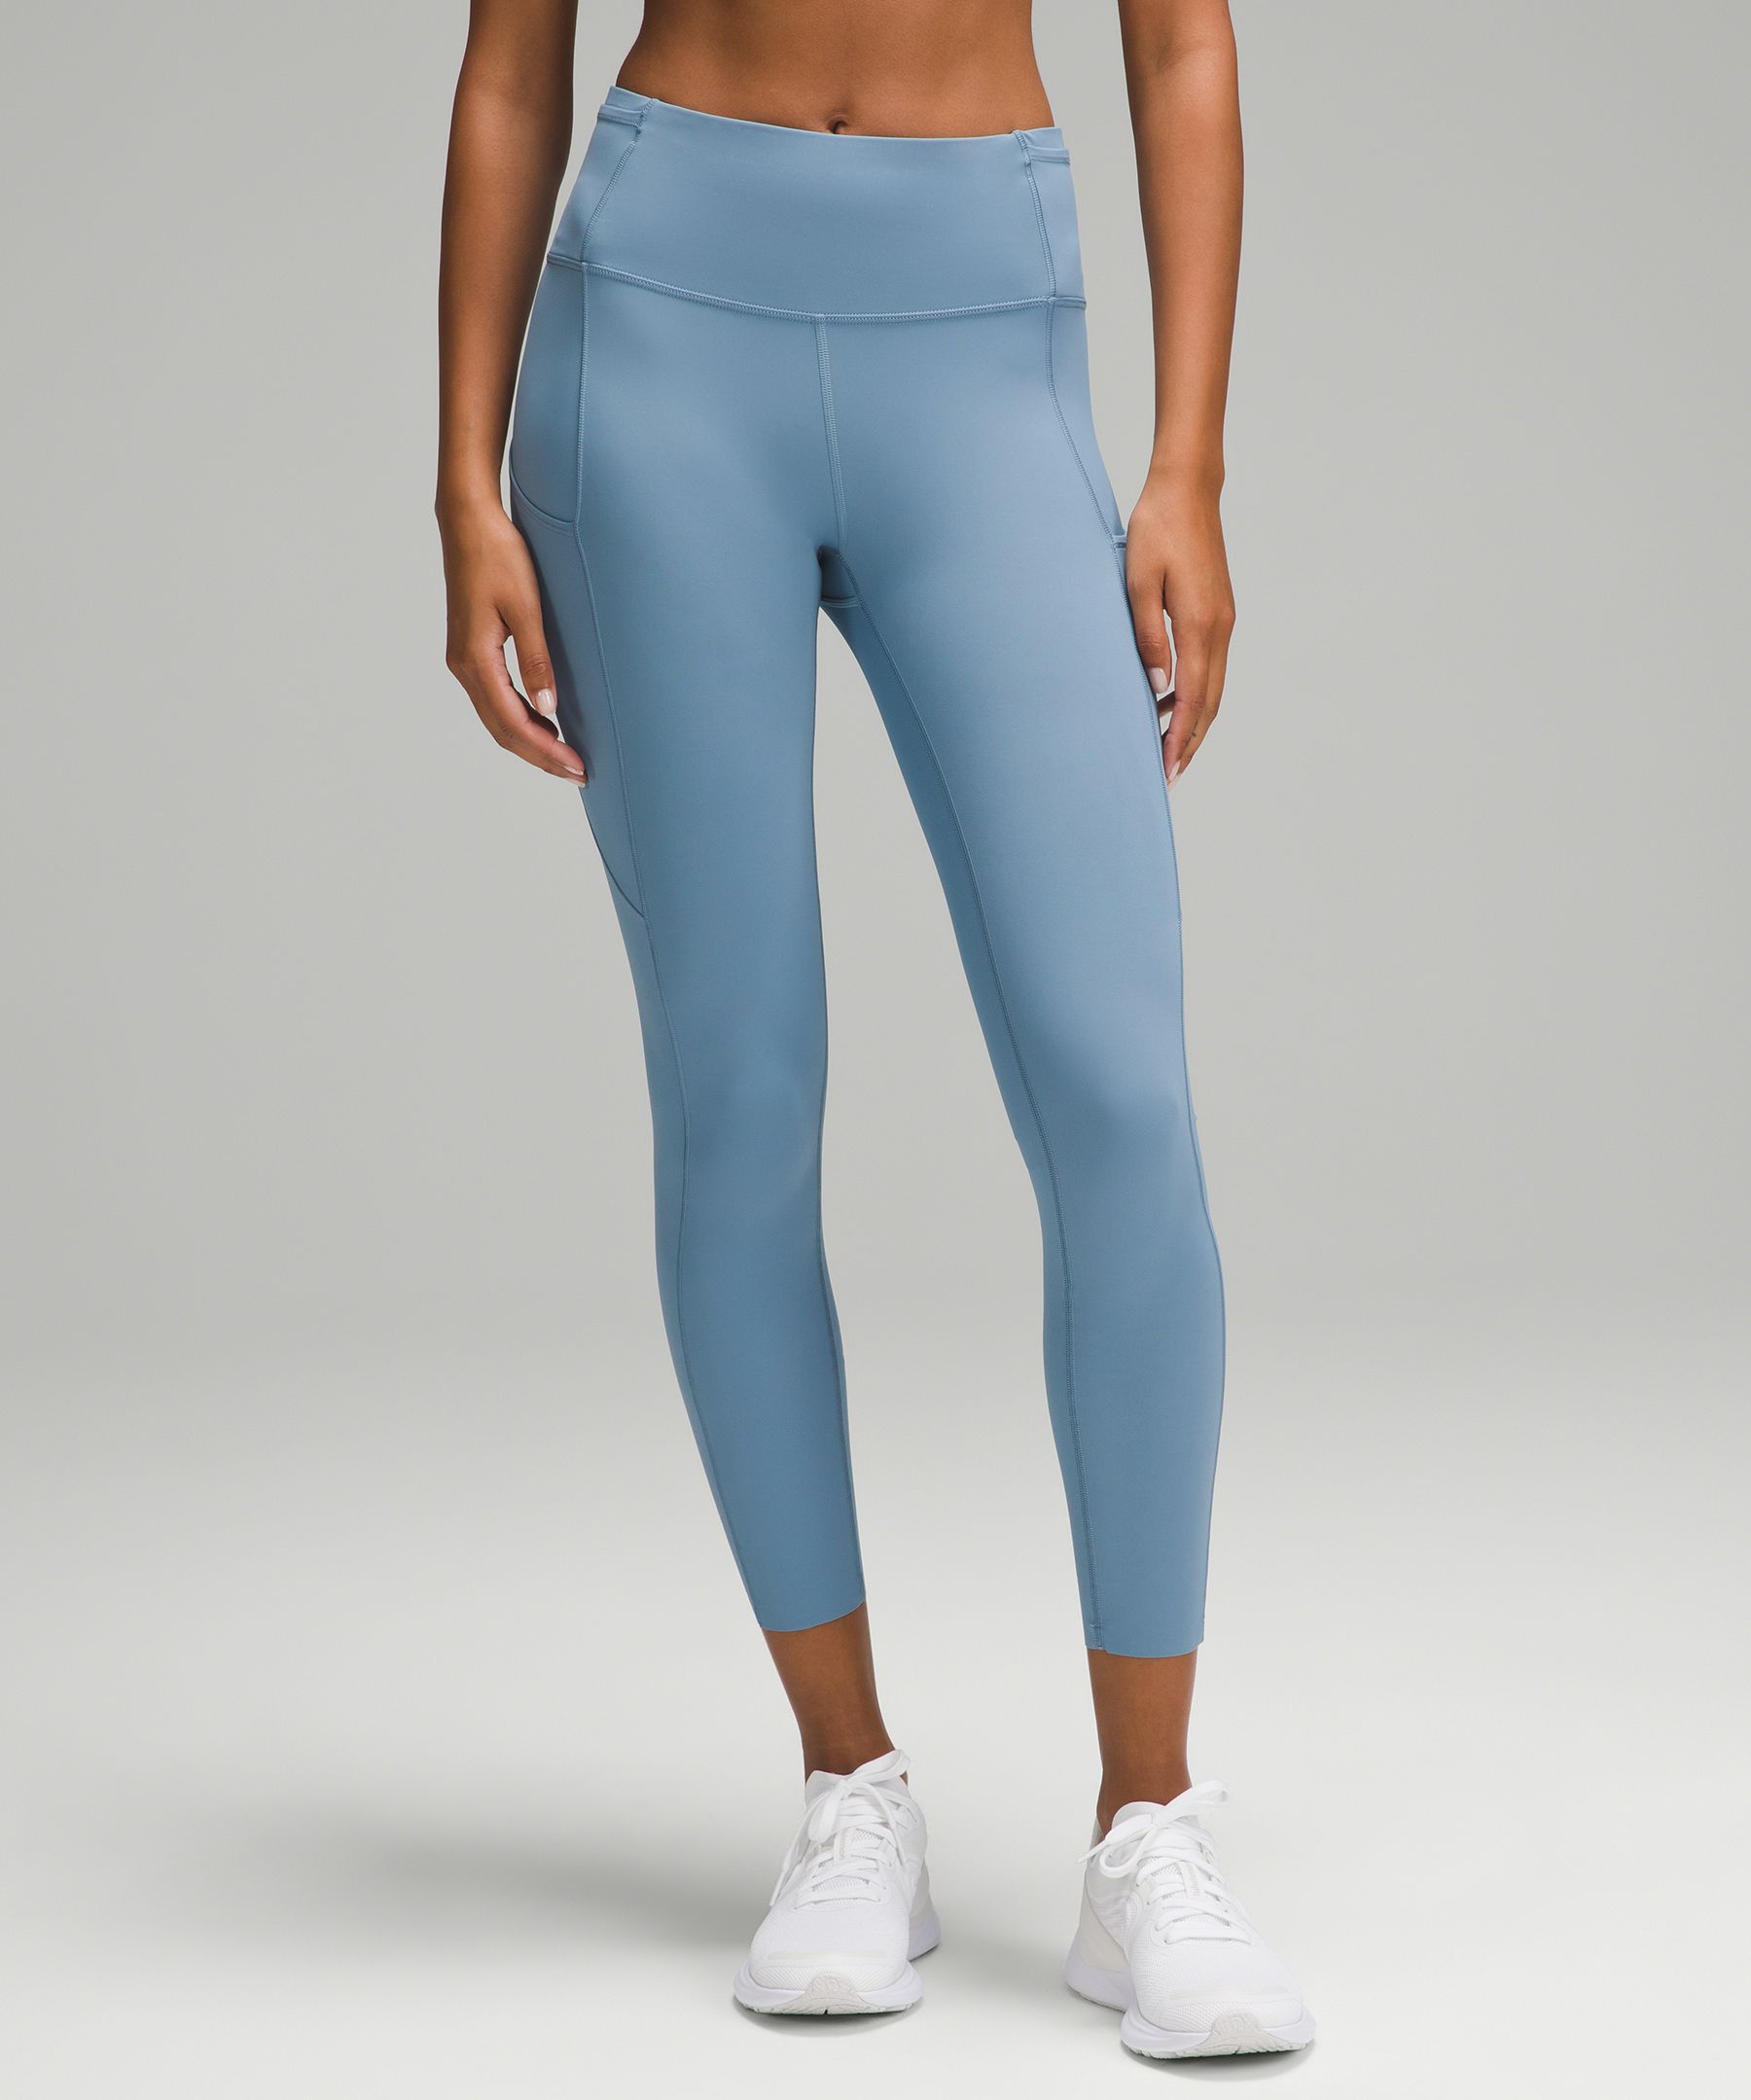 Lululemon Fast and Free 25” size 6 Reflective  Leggings are not pants,  Pants for women, Clothes design